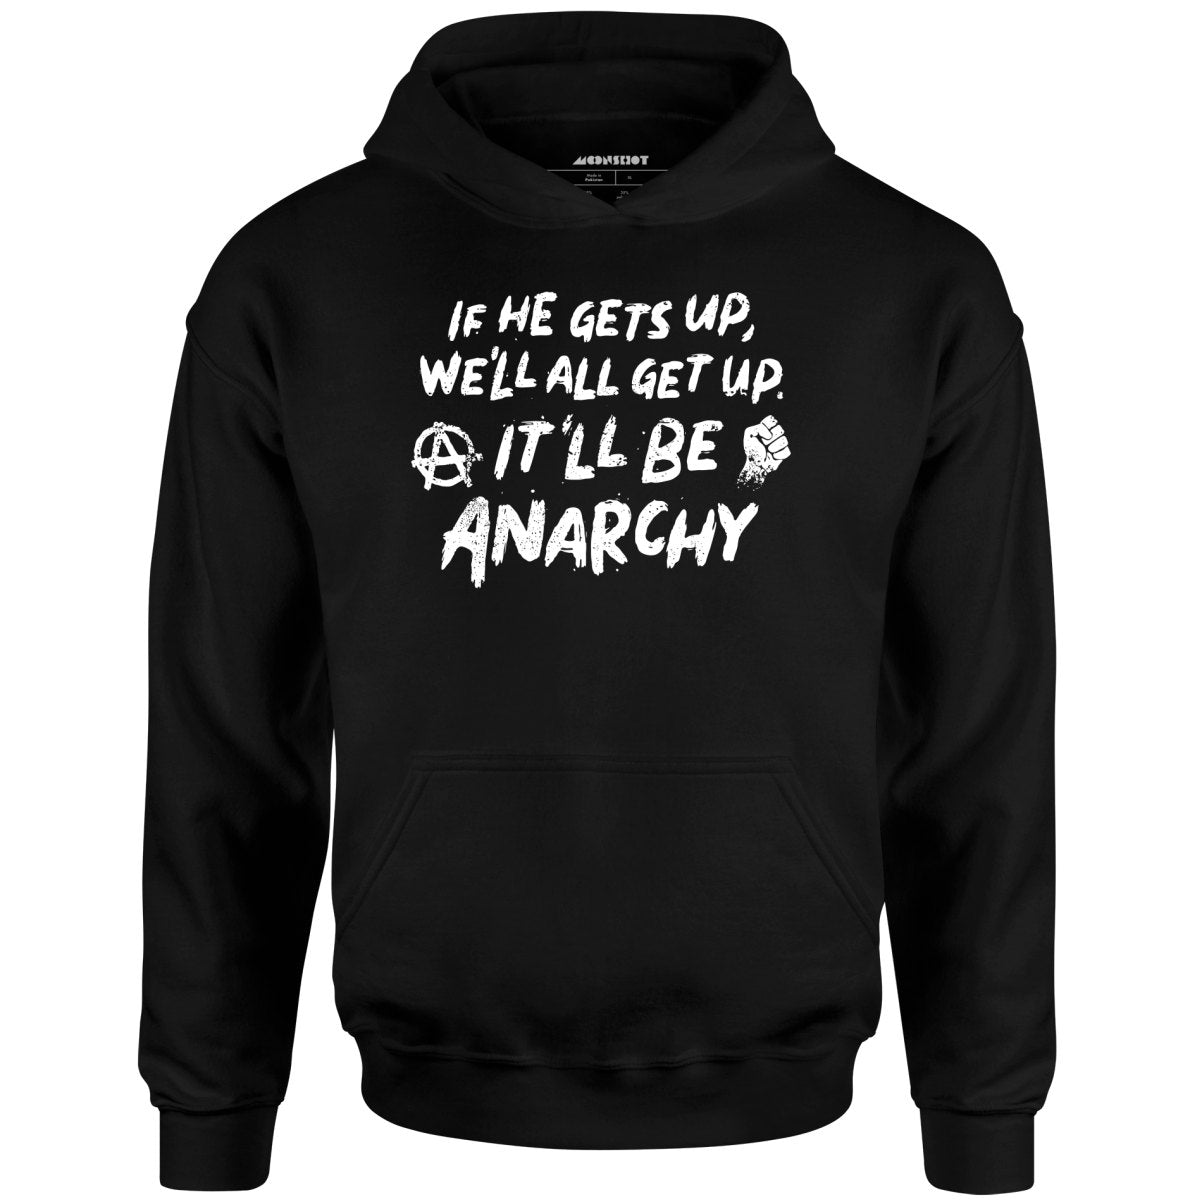 It'll Be Anarchy - Unisex Hoodie